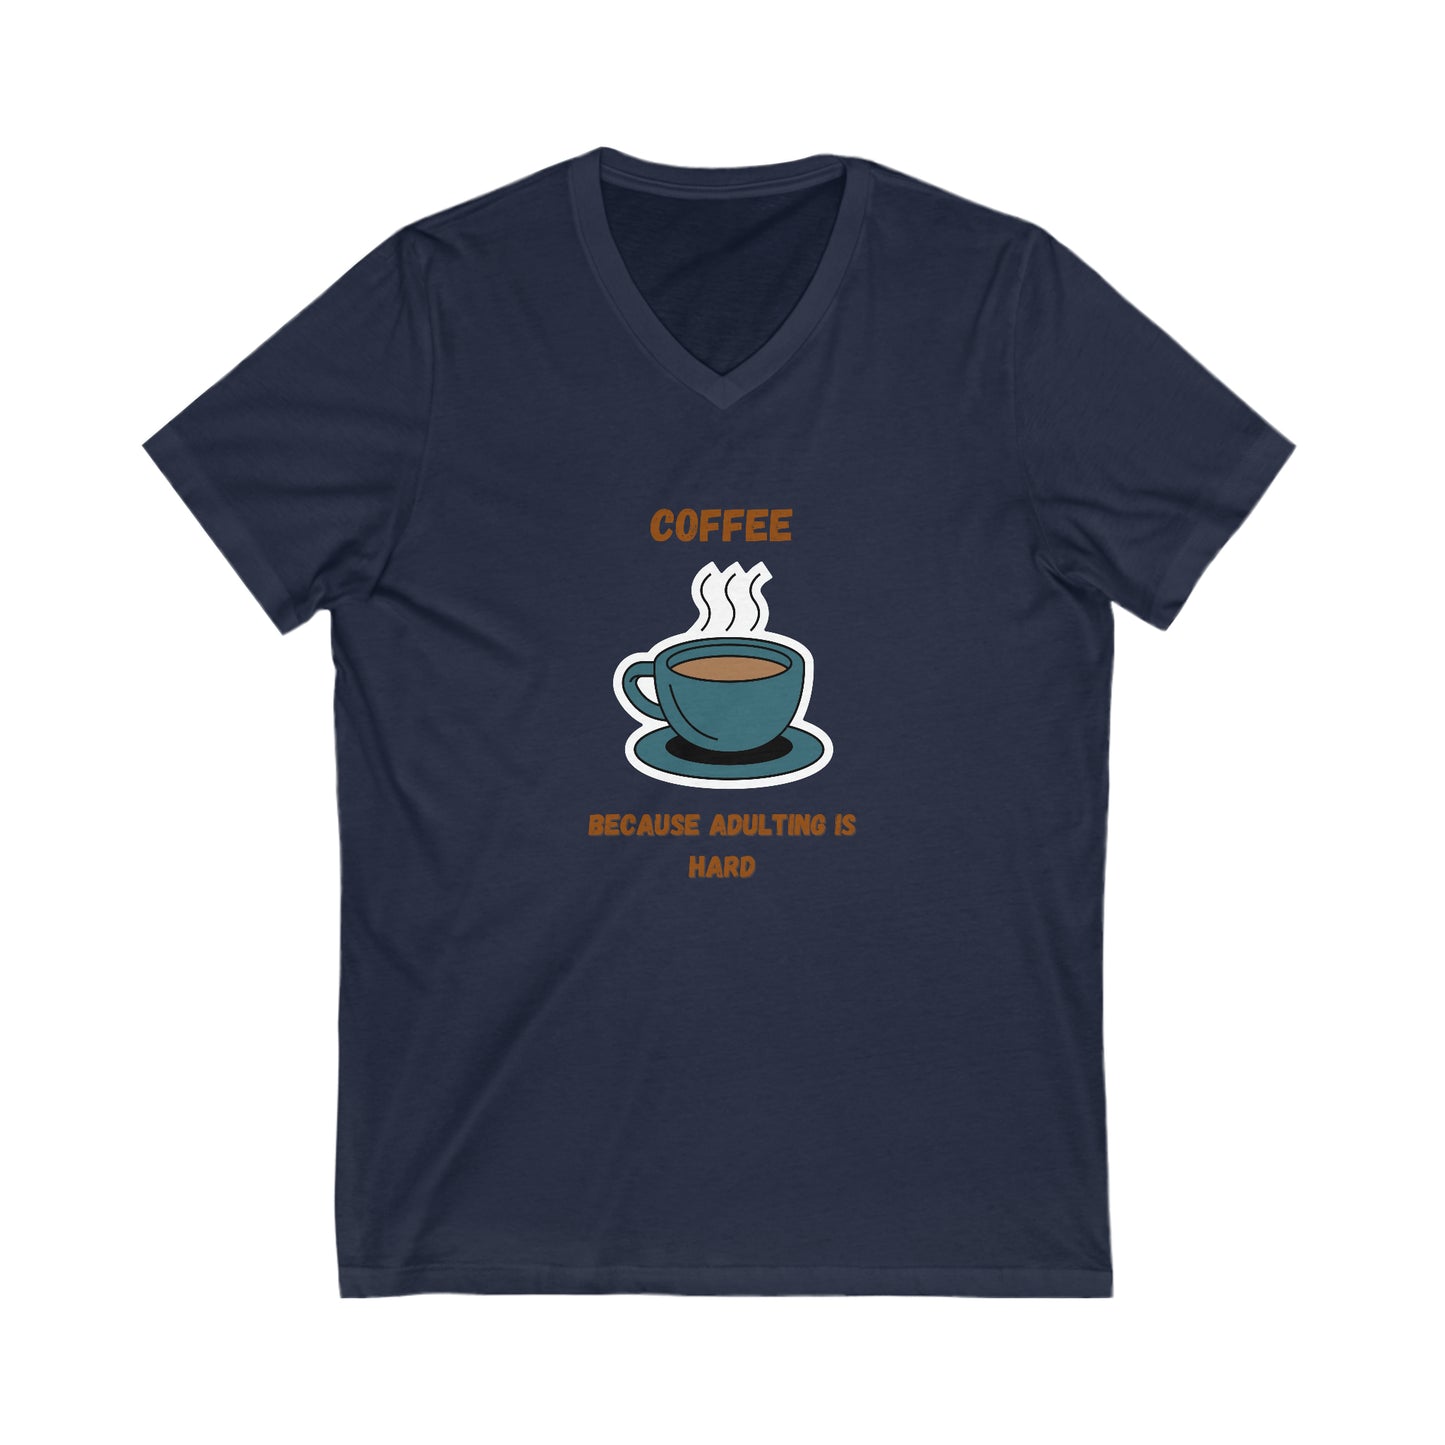 Adulting Is Hard V Neck Tee Blue